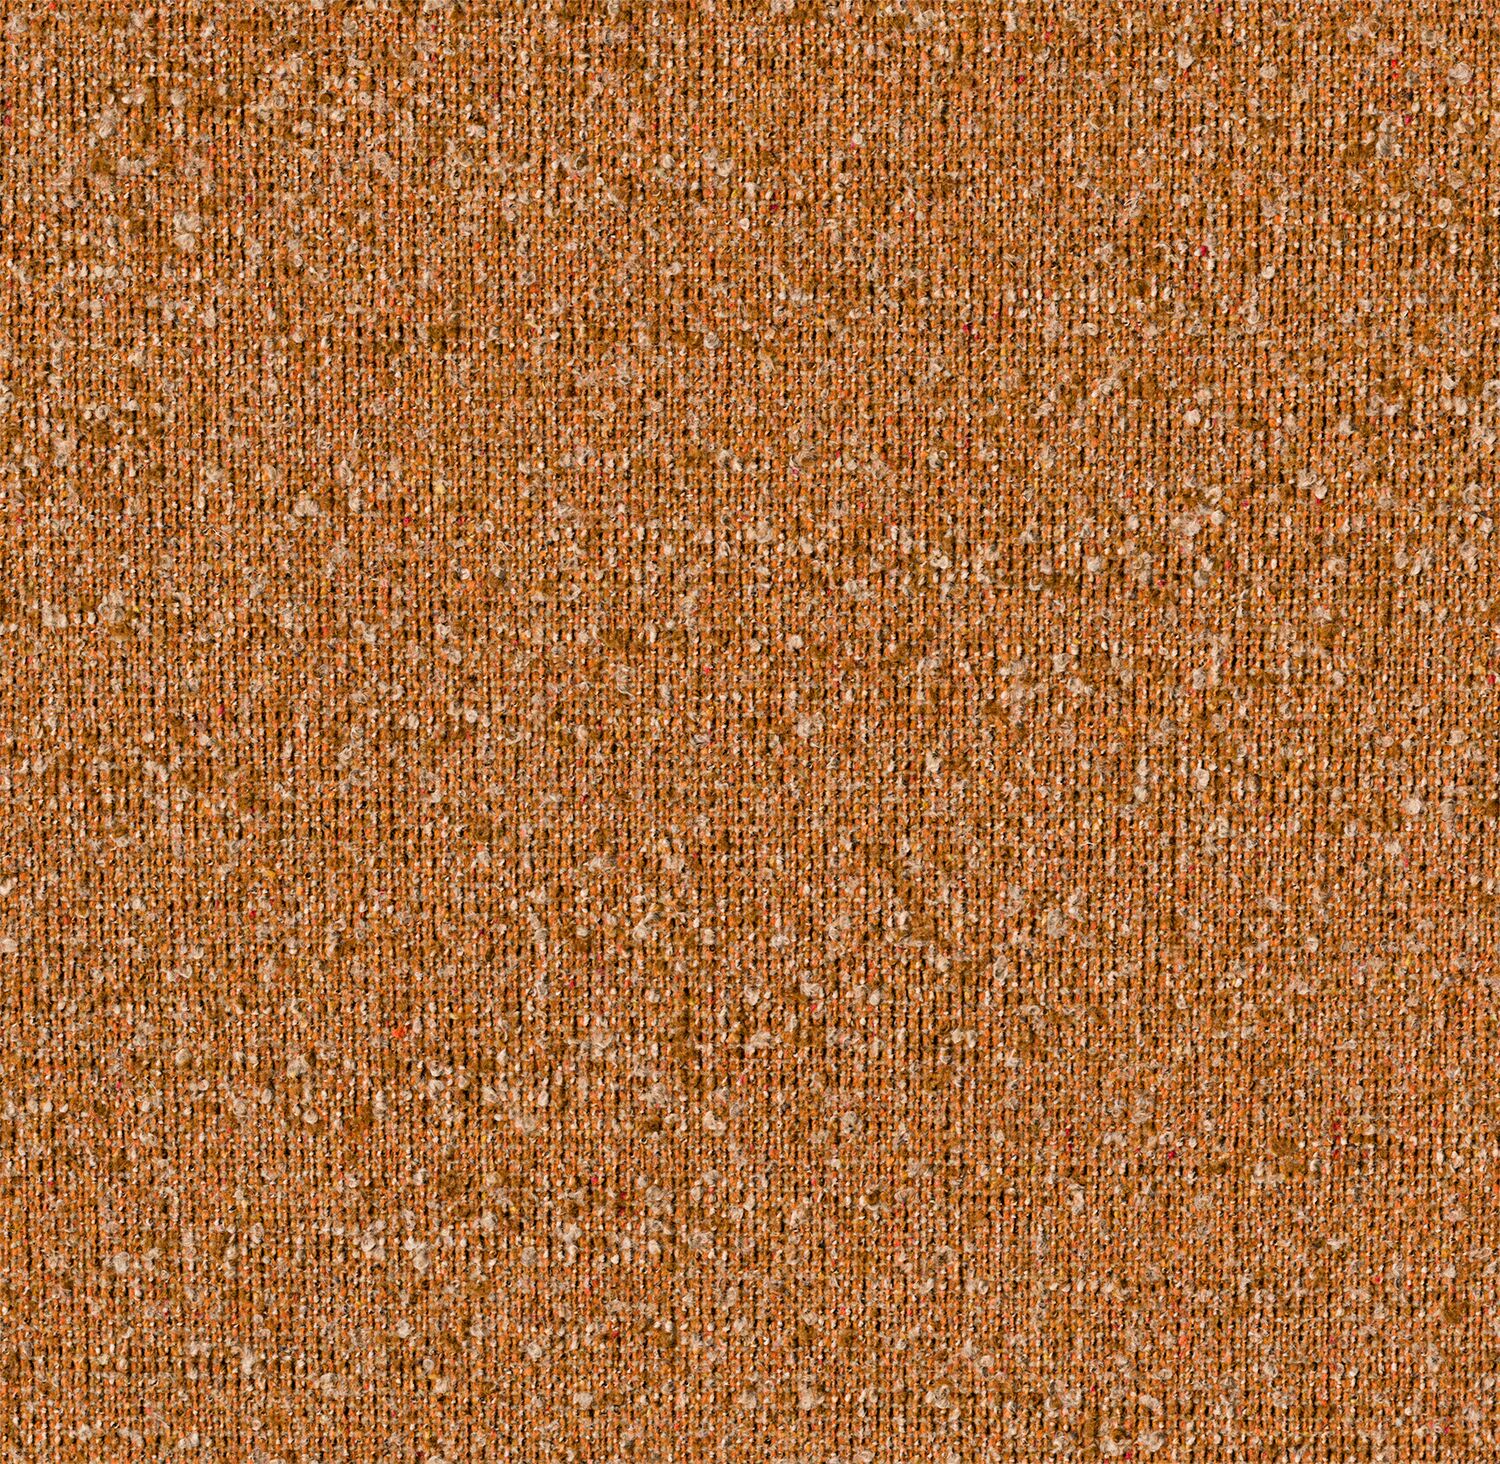 Everyday Boucle - Spicebush - 4111 - 19 Tileable Swatches